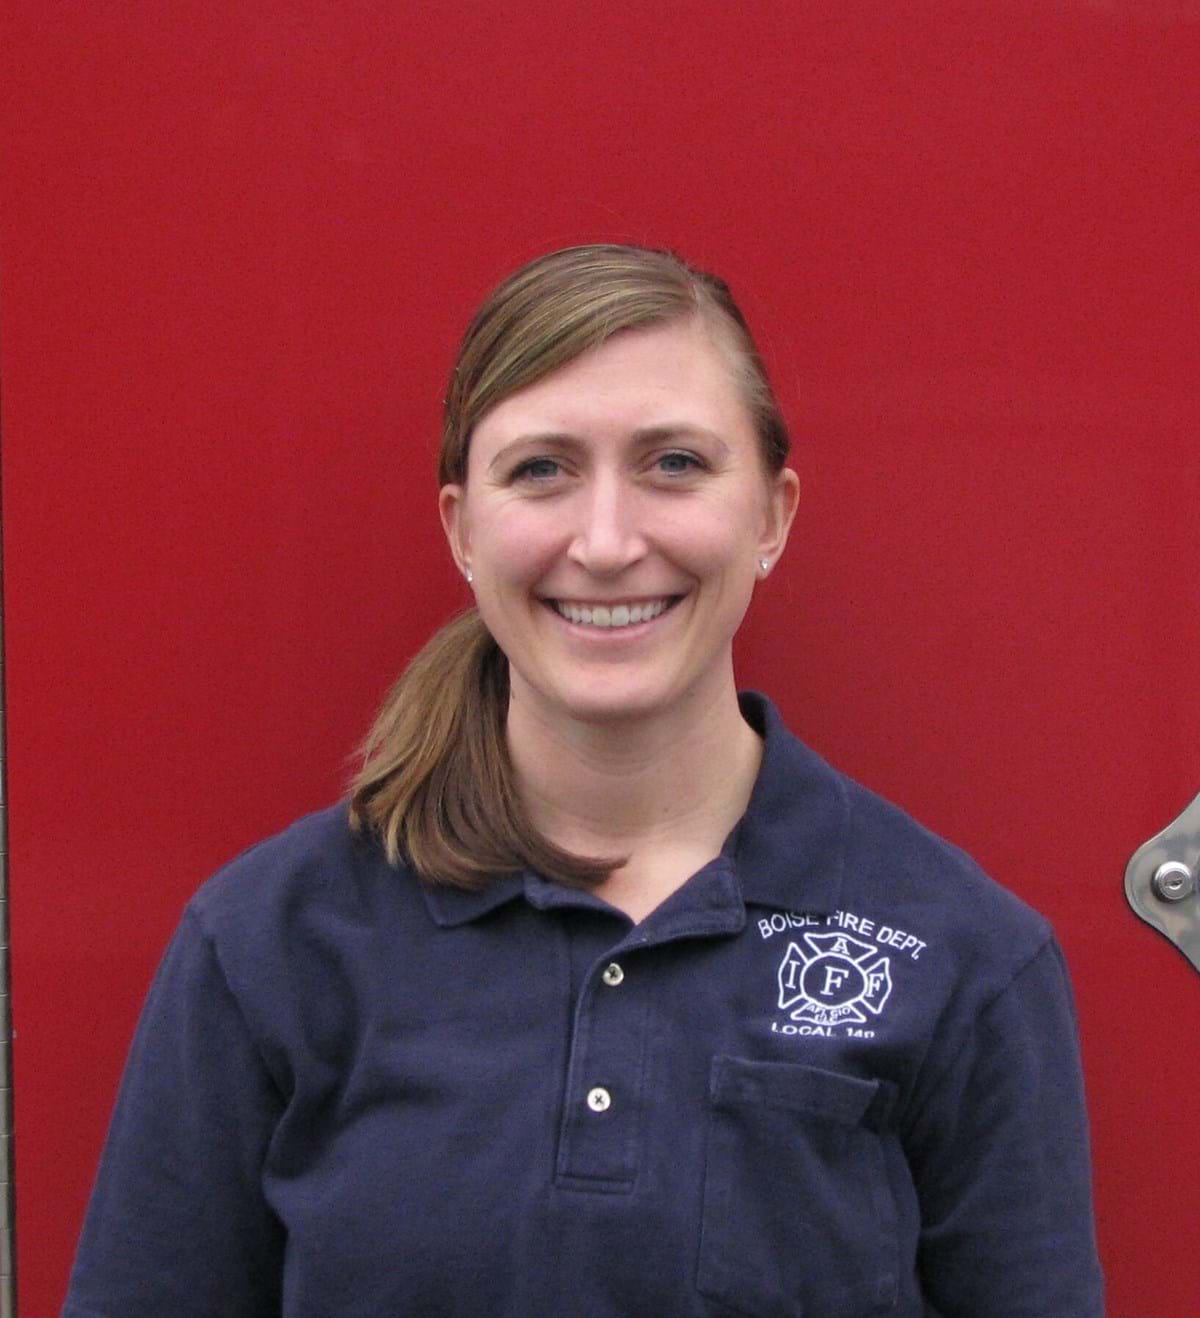 Female with blue polo shirt with Boise Fire logo on it.